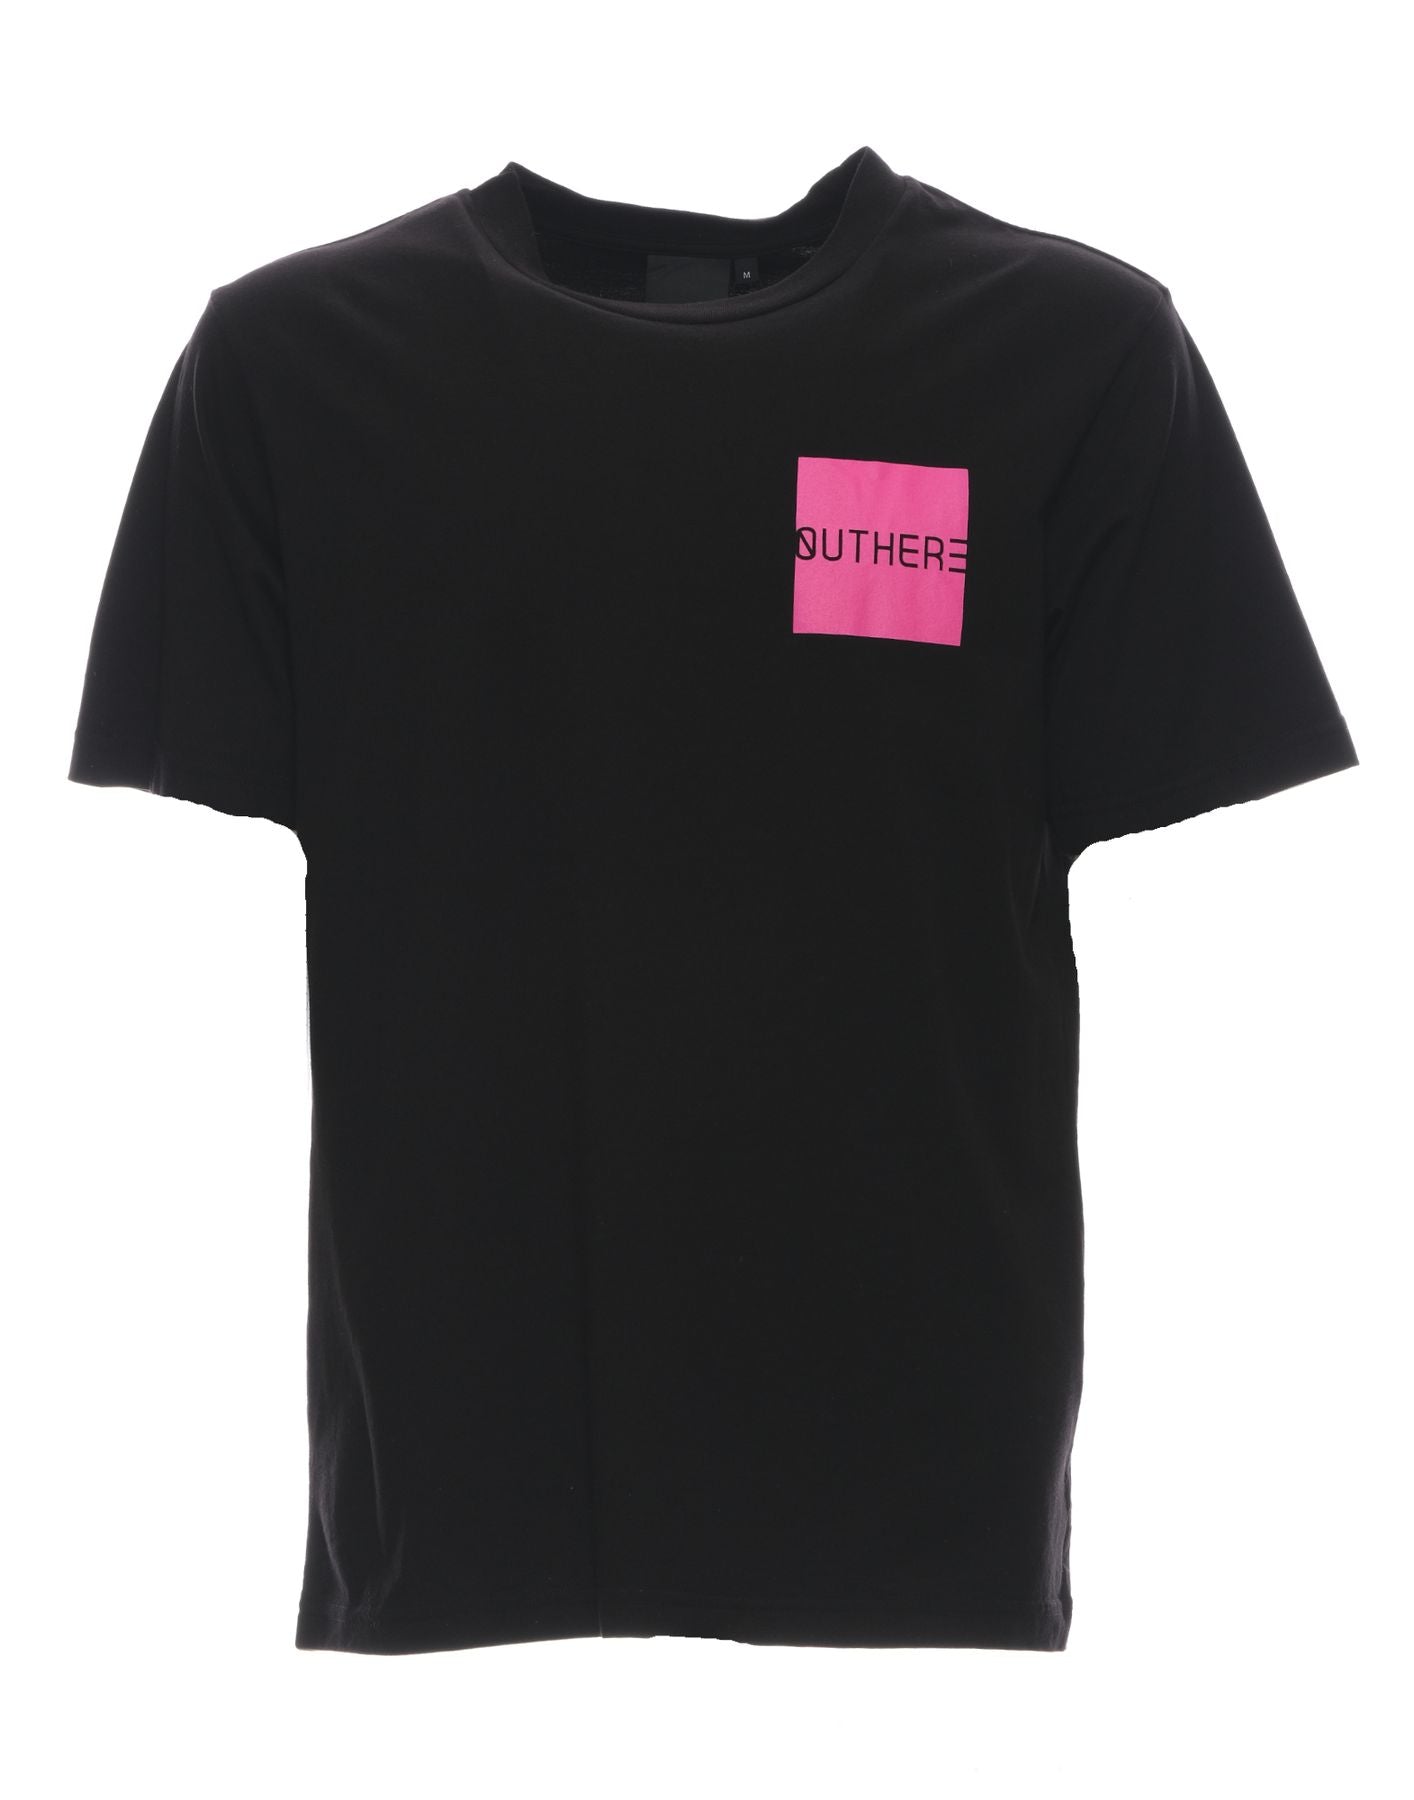 T-shirt for man IOTM138AE80 BLACK OUTHERE